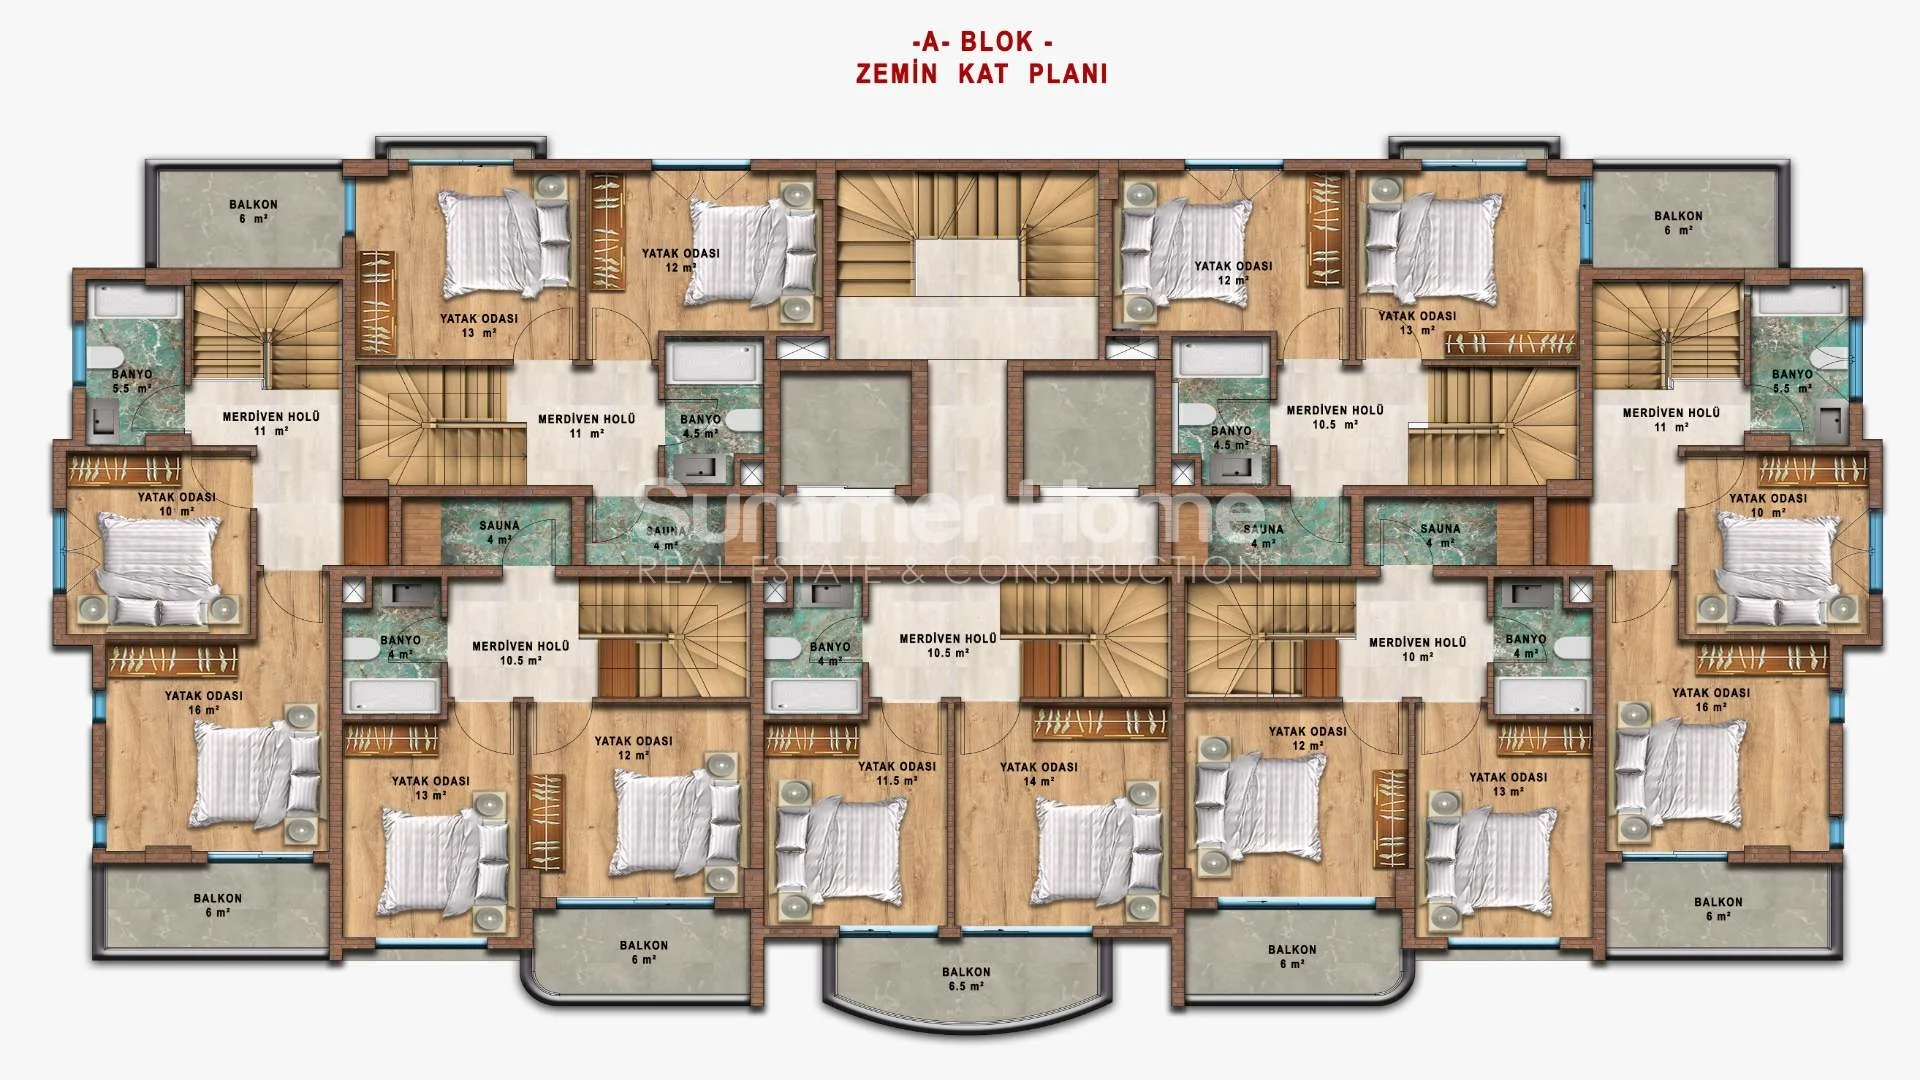 Exquisite Sea View Apartments For Sale in Turkler Plan - 57